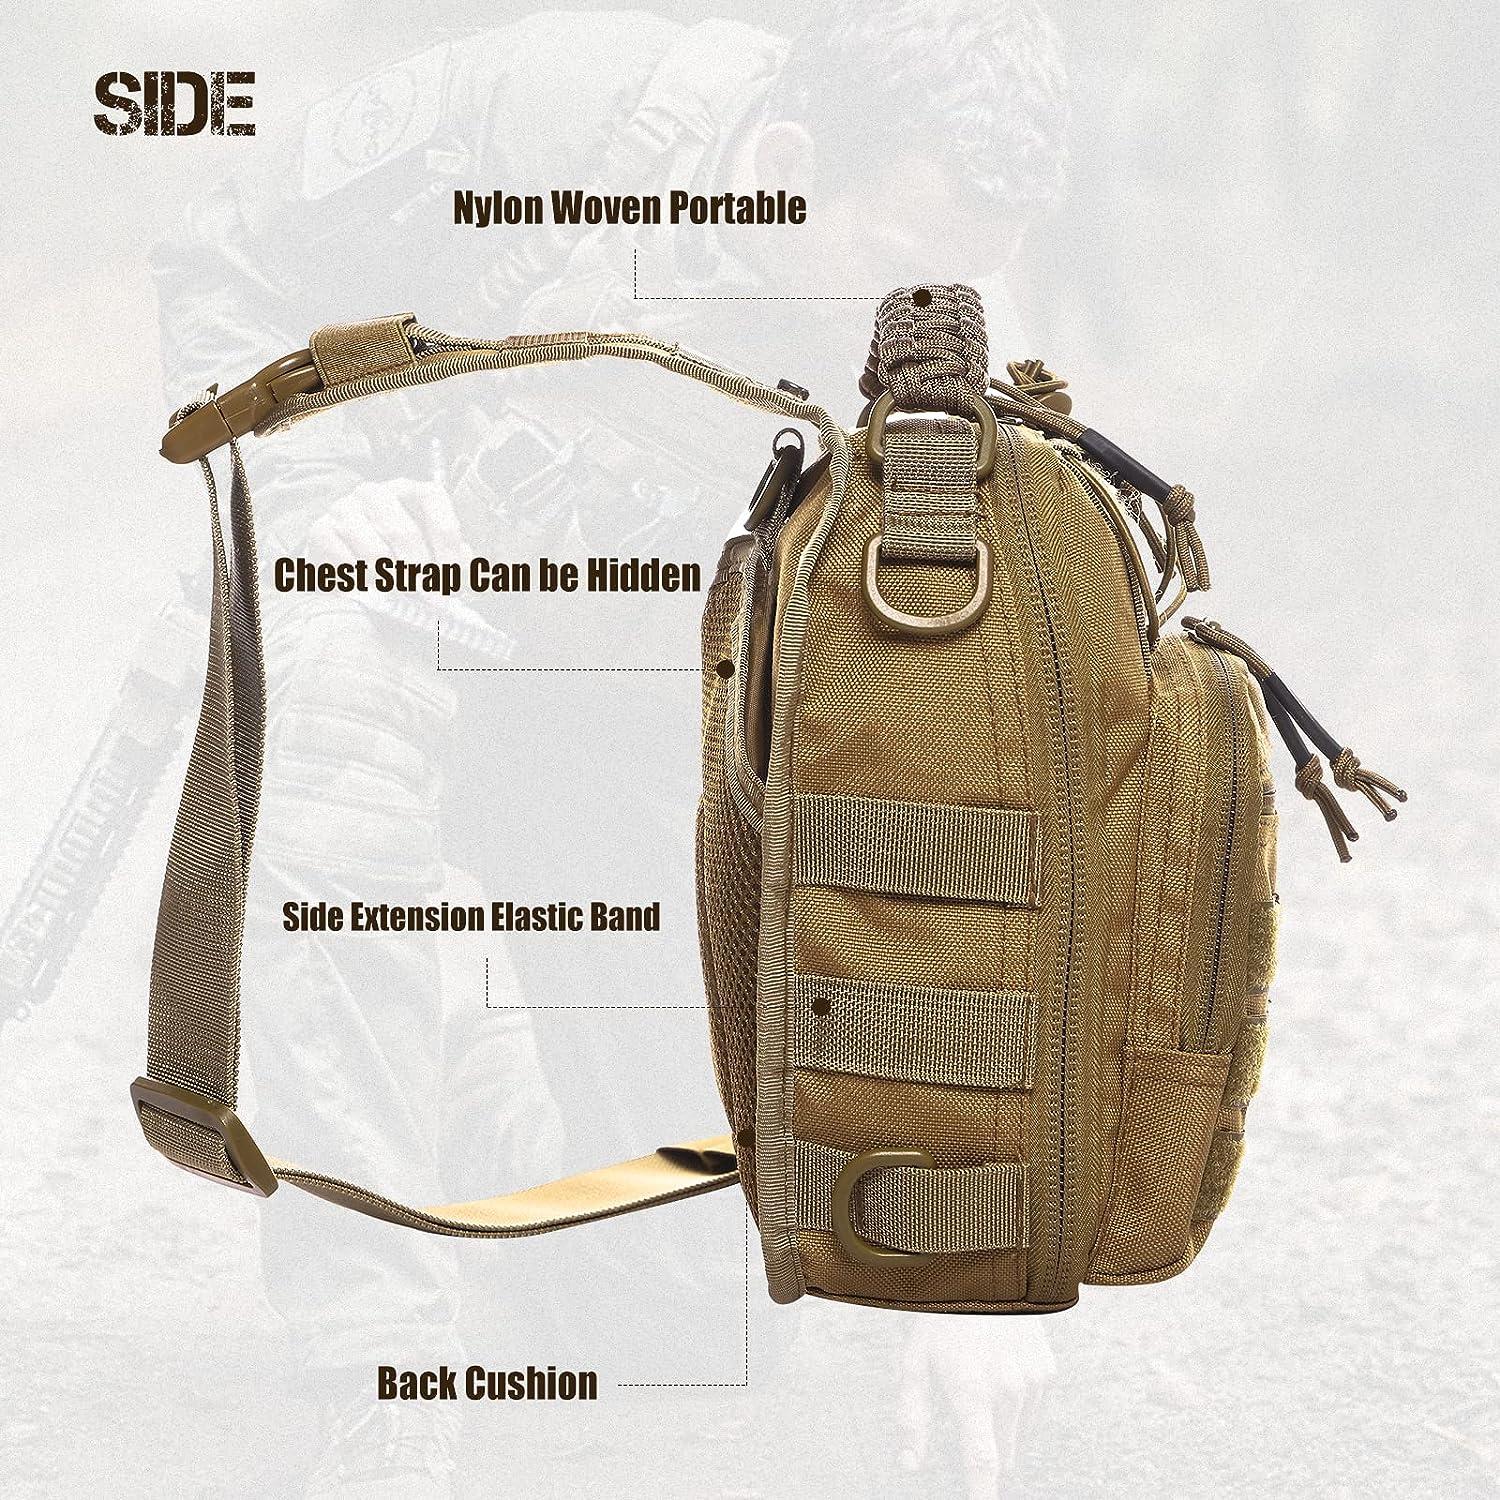 Tactical Shoulder Bag With Cushion Strap Outdoor Chest Bag Multi